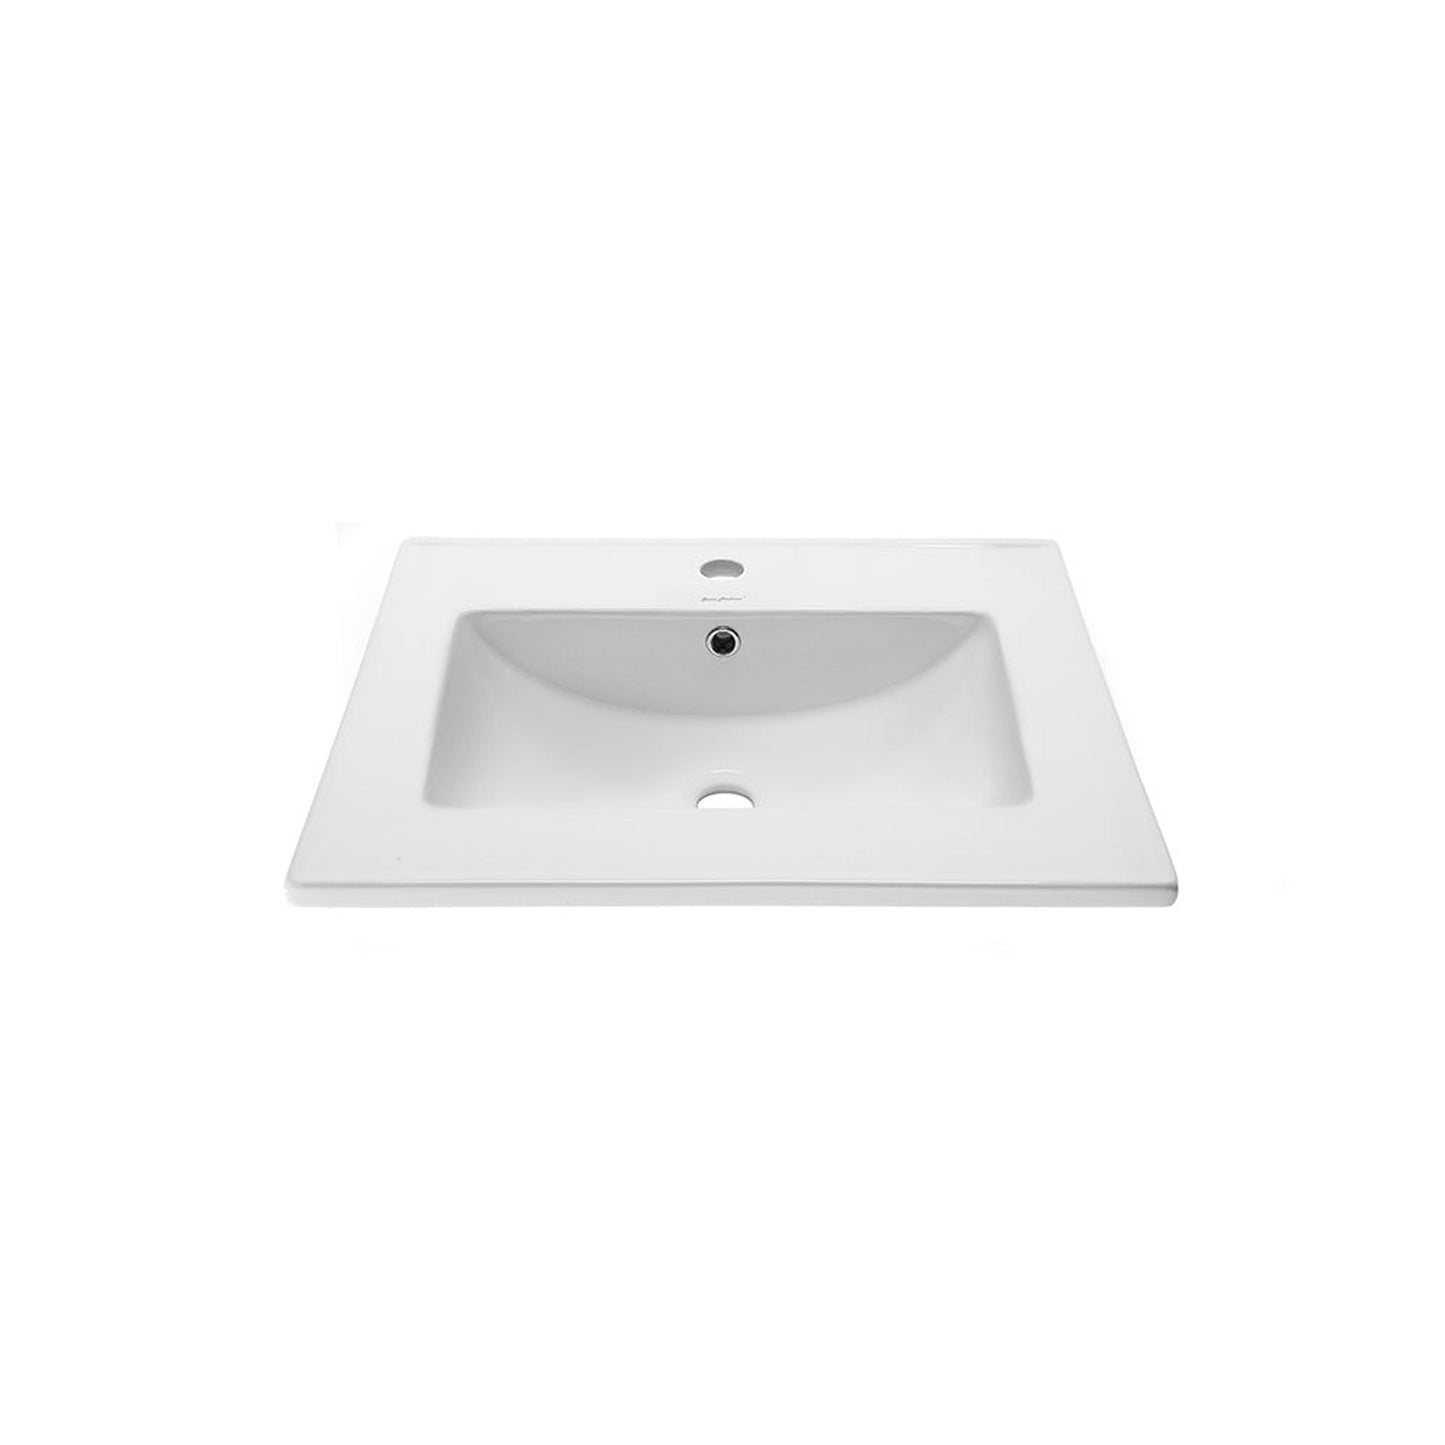 Swiss Madison Voltaire 24" x 19" Rectangular White Ceramic Bathroom Vanity Top Drop-In Sink With Single Hole Faucet